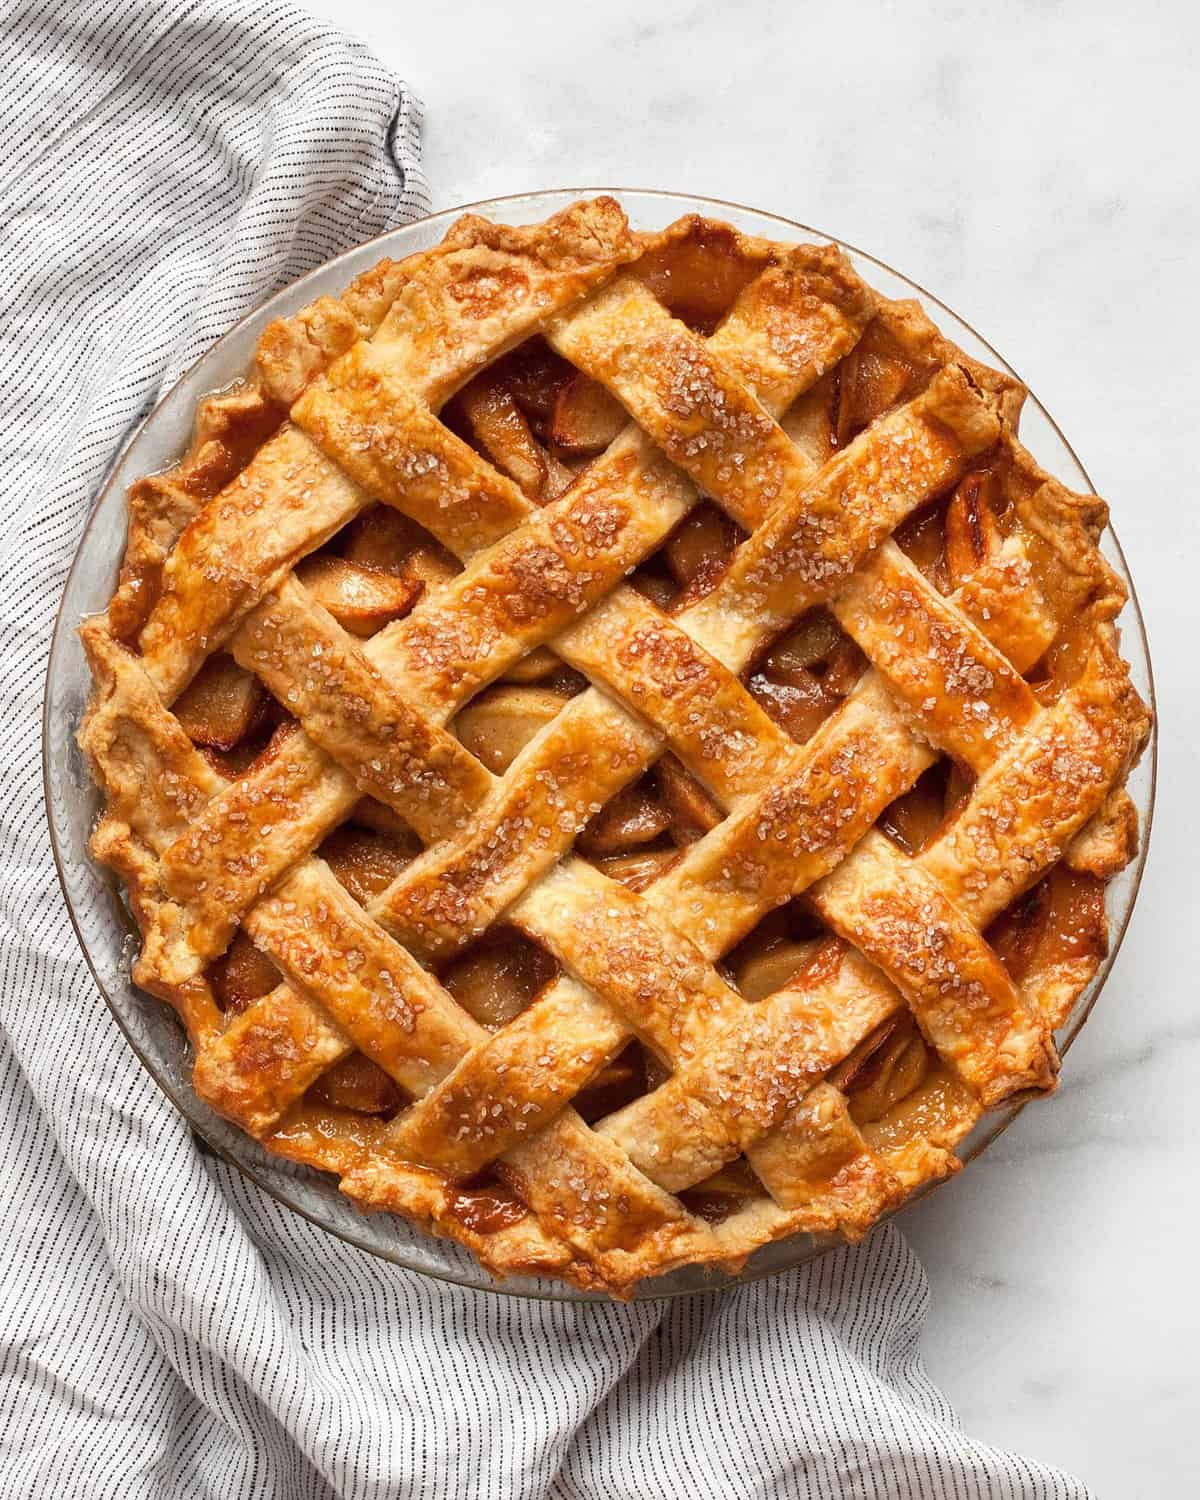 Salted caramel apple pie in a dish.